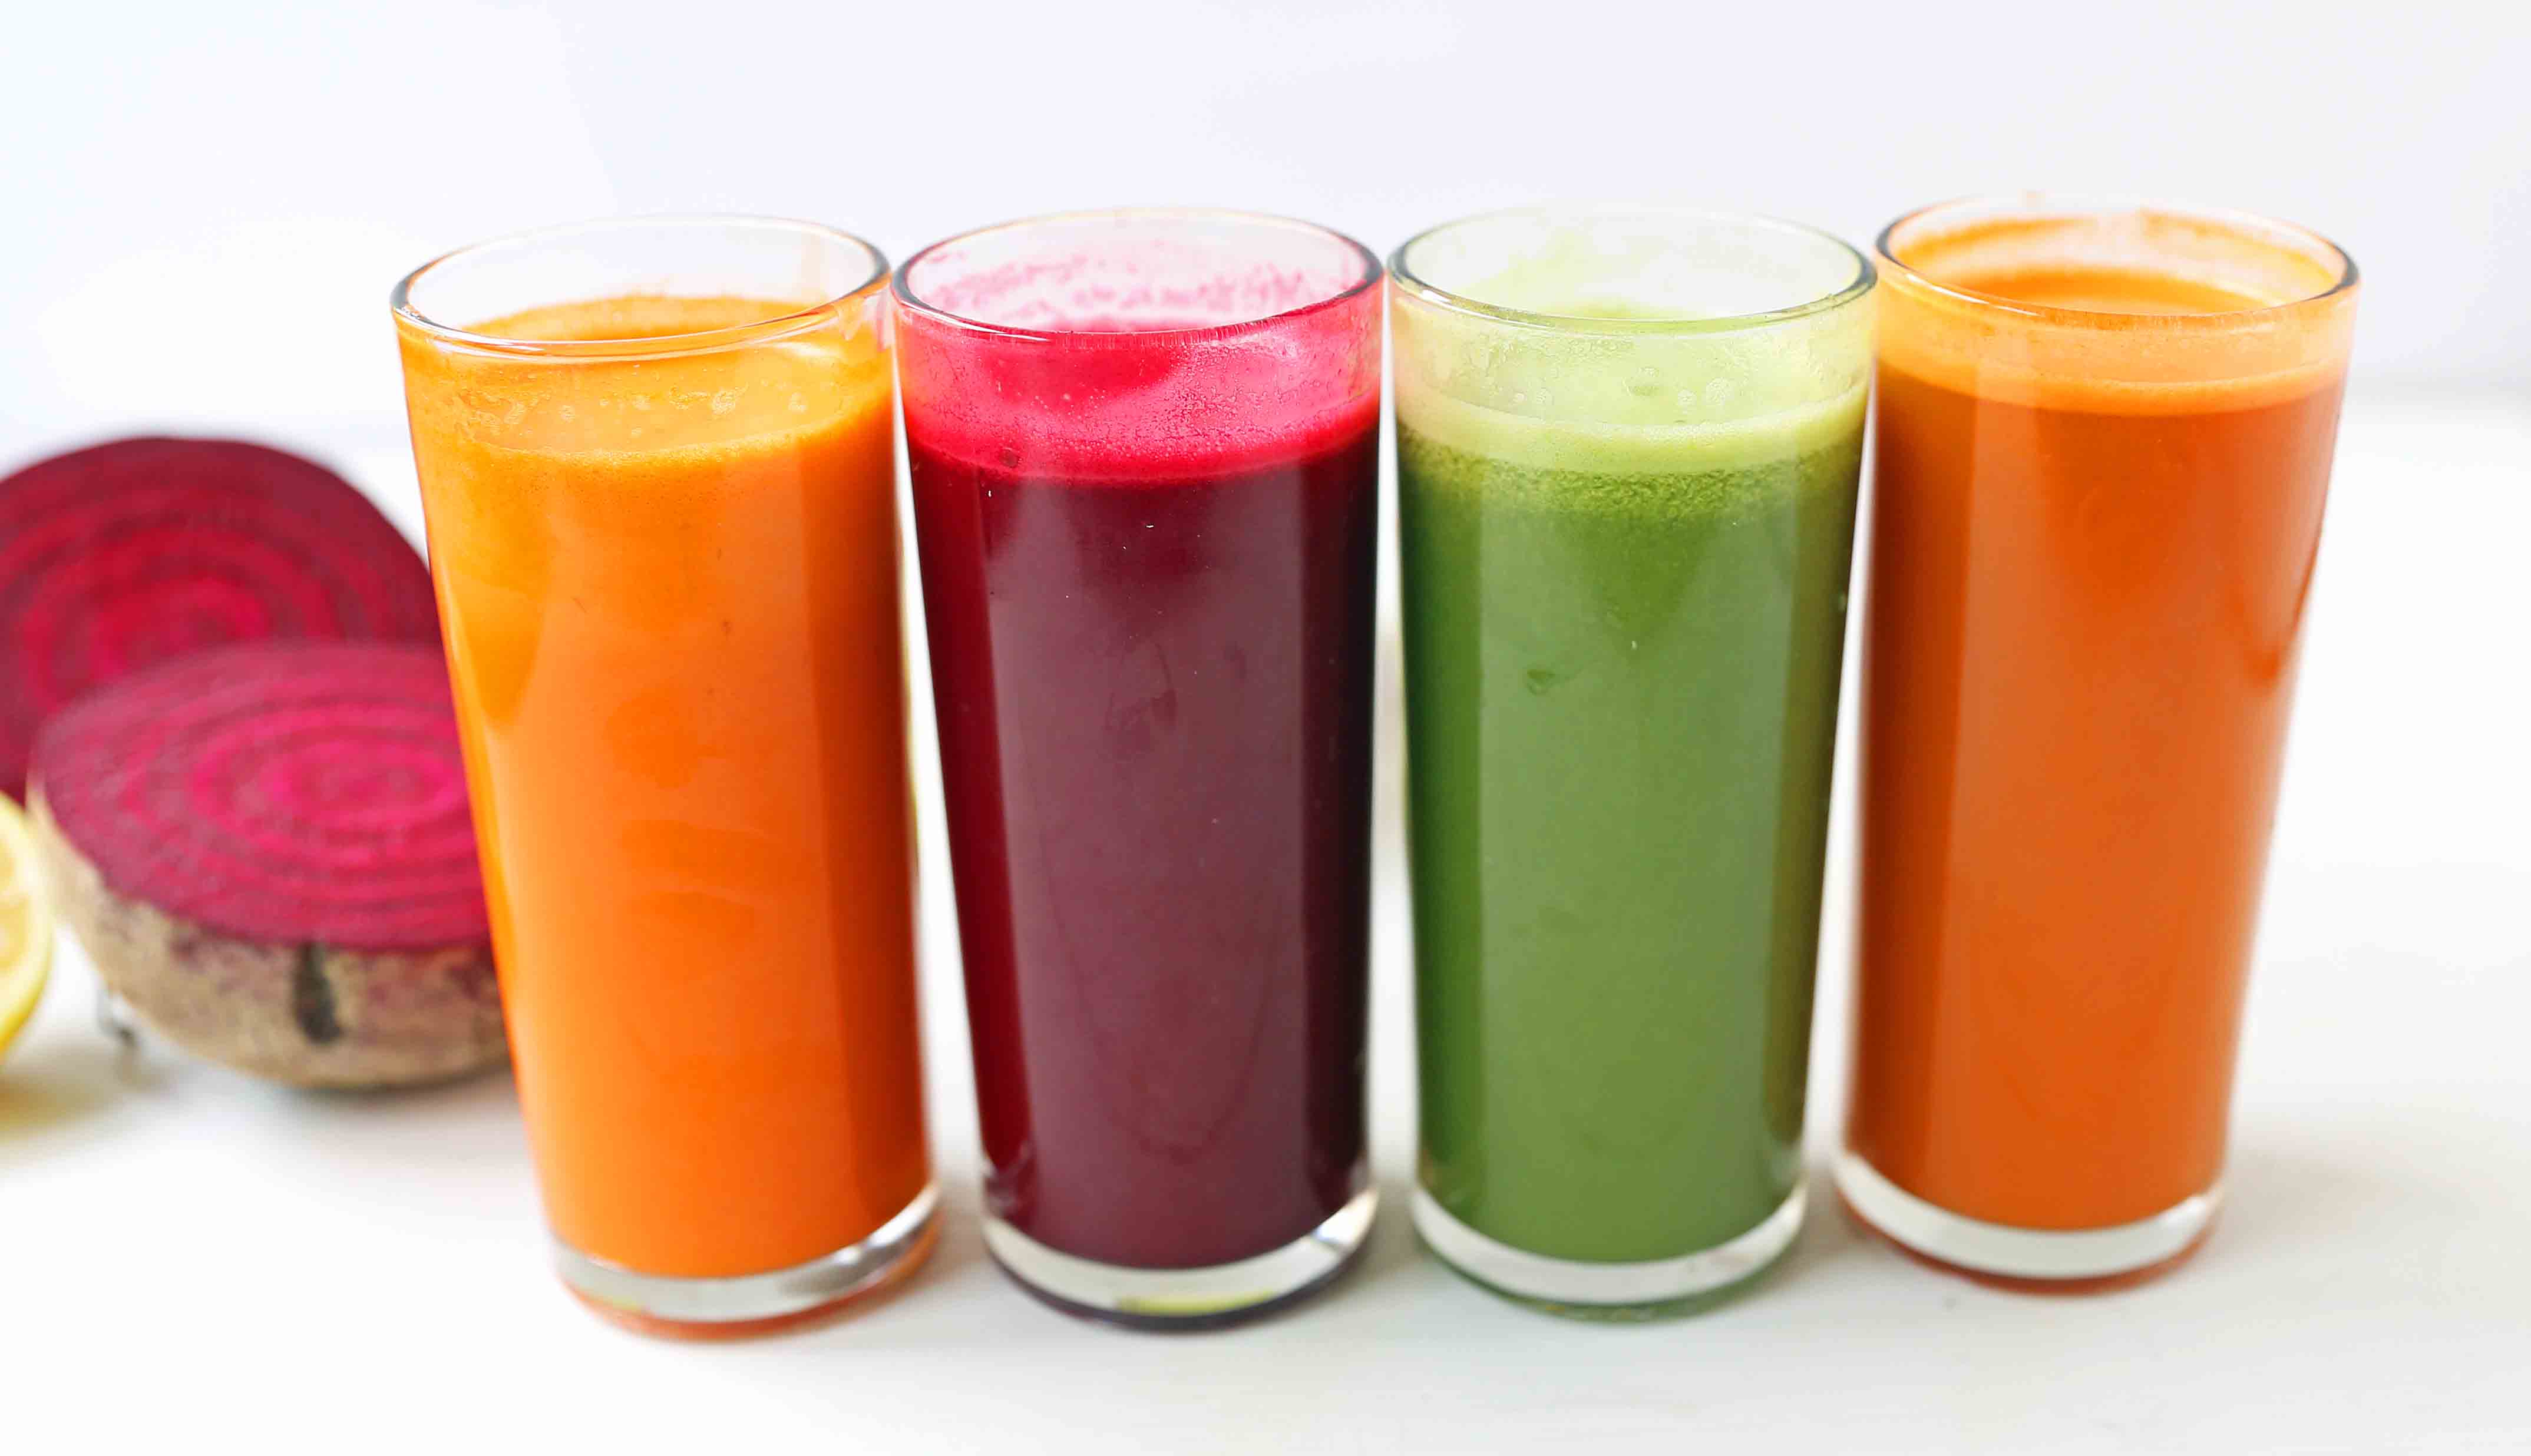 Healthy Juice Cleanse Recipes. Four health fresh fruit and vegetable juice recipes. How to make fresh juices at home for a fraction of the price. Find out the immune boosting and health benefits from juicing. www.modernhoney.com #juicing #juices #fruitandvegetablejuices #juicingrecipes